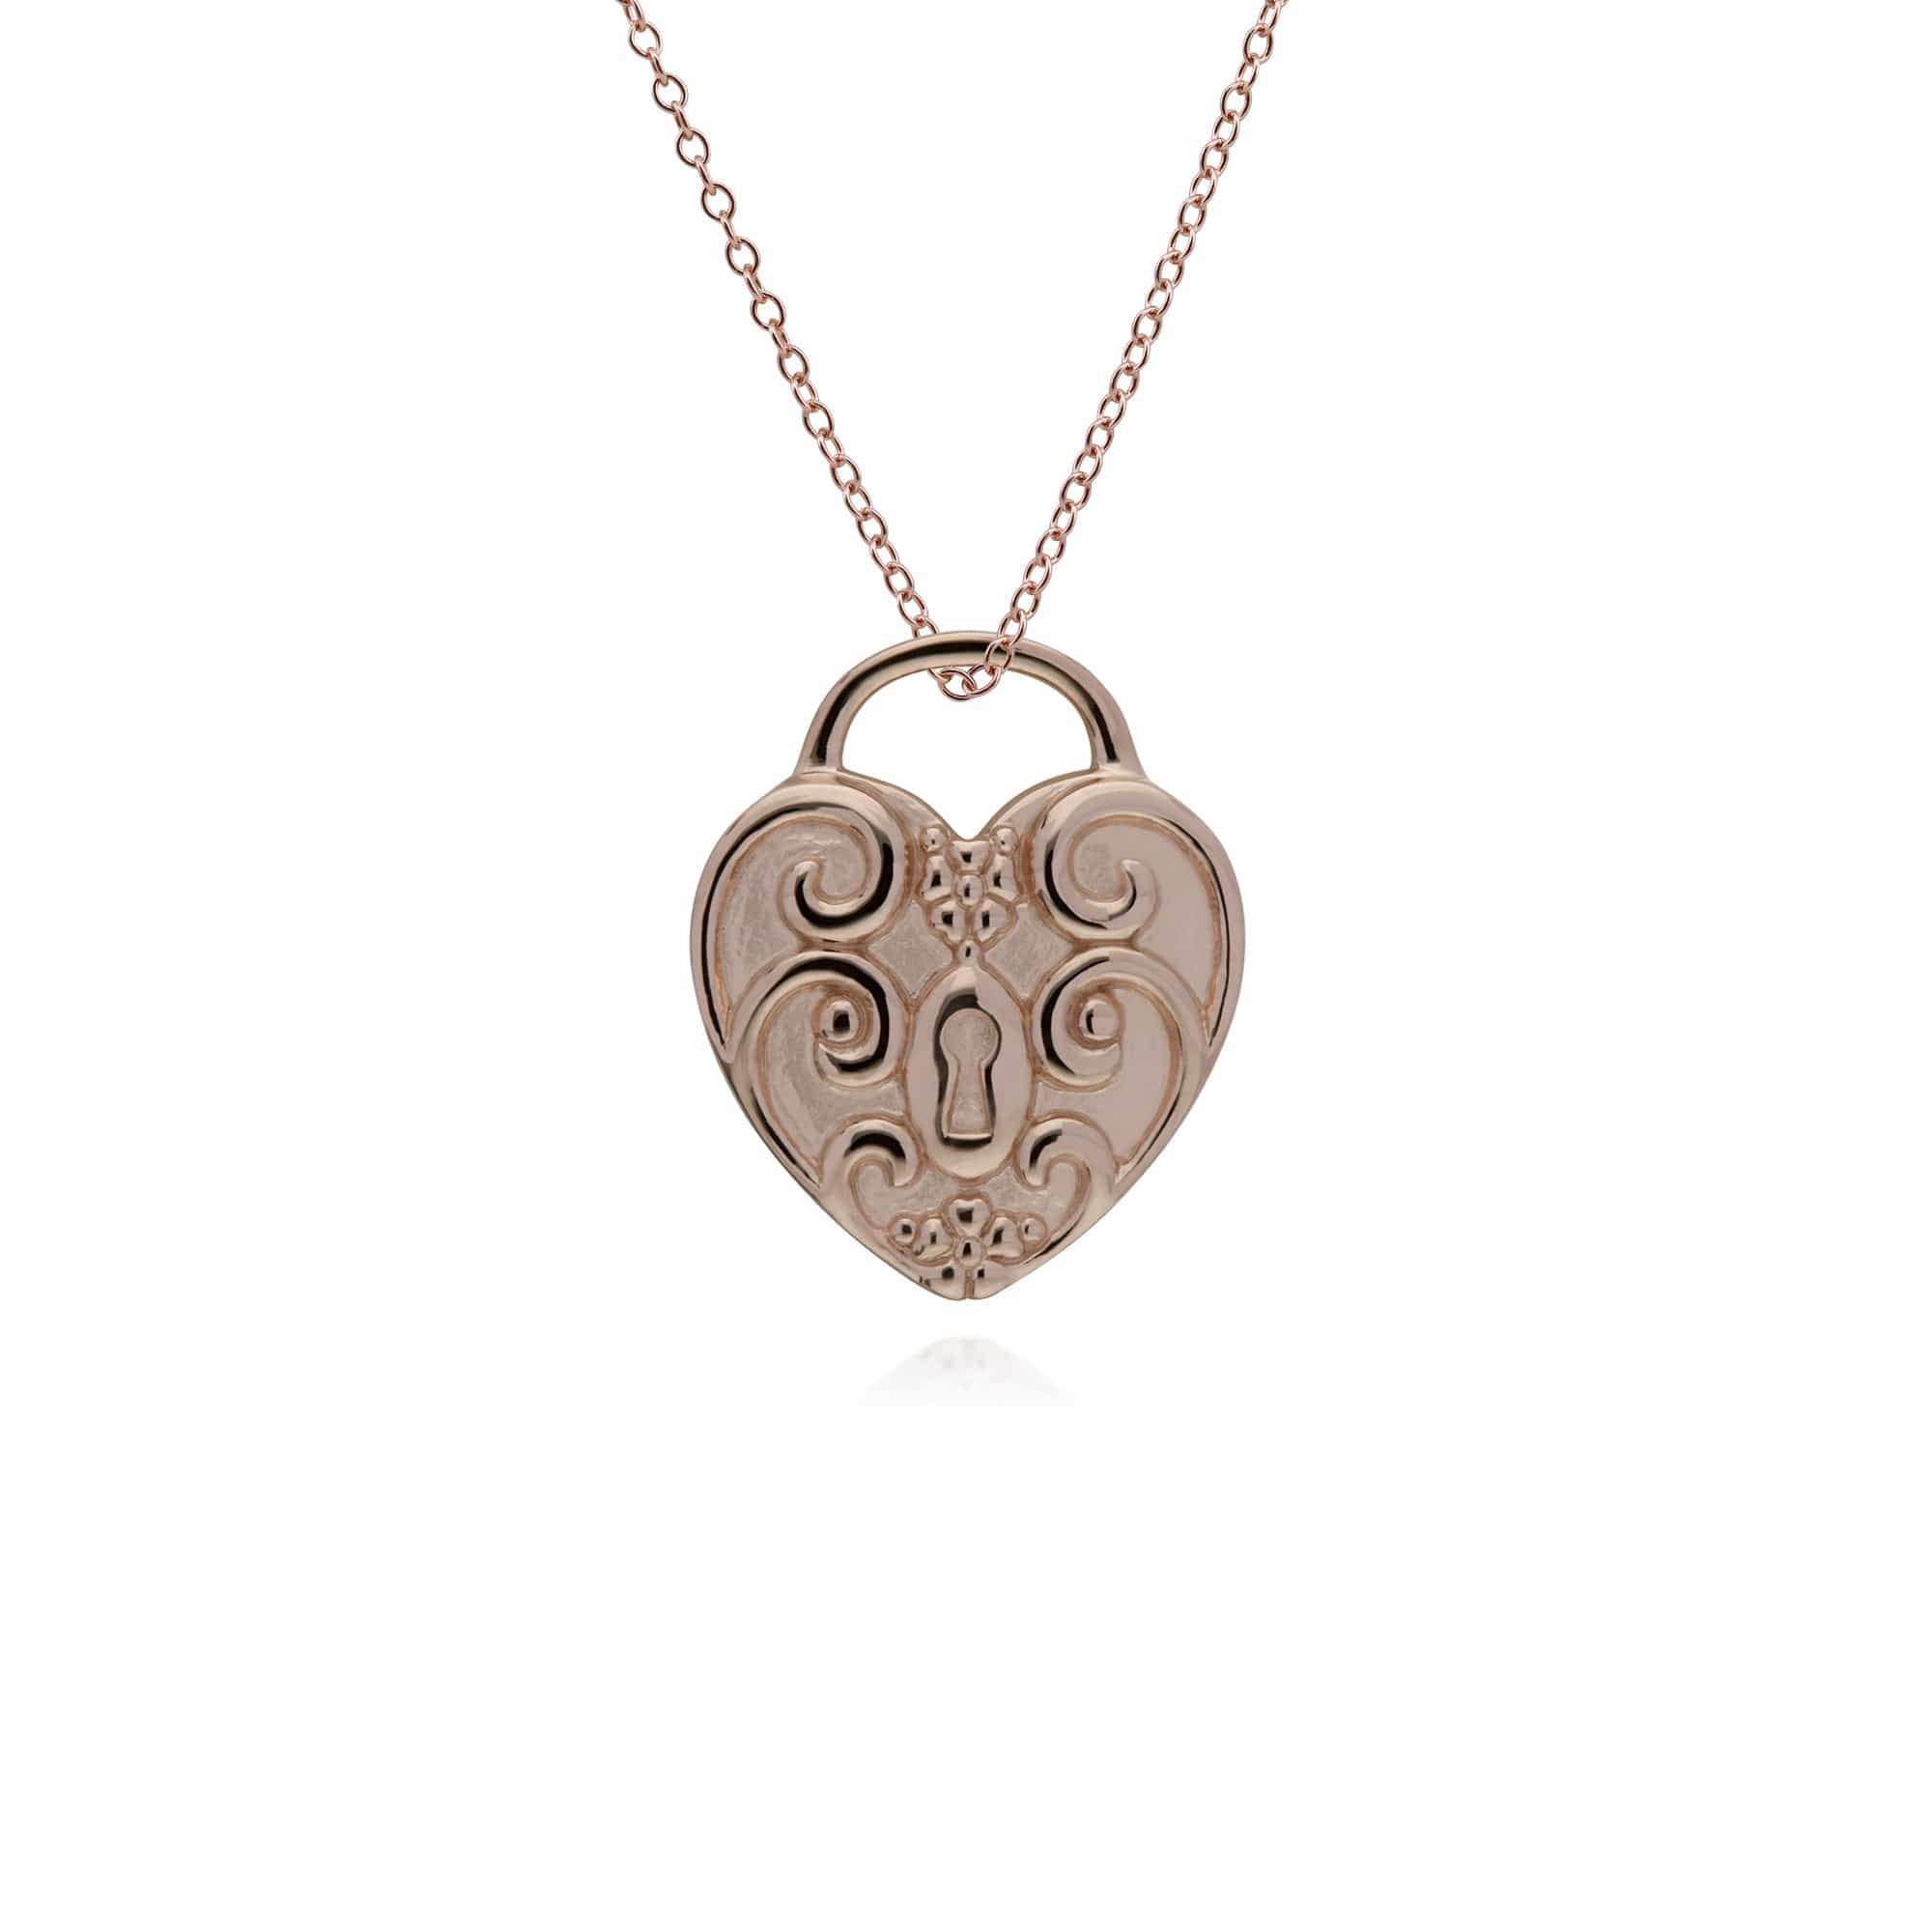 270P027309925-270P026501925 Classic Swirl Heart Lock Pendant & Ruby Charm in Rose Gold Plated 925 Sterling Silver 3